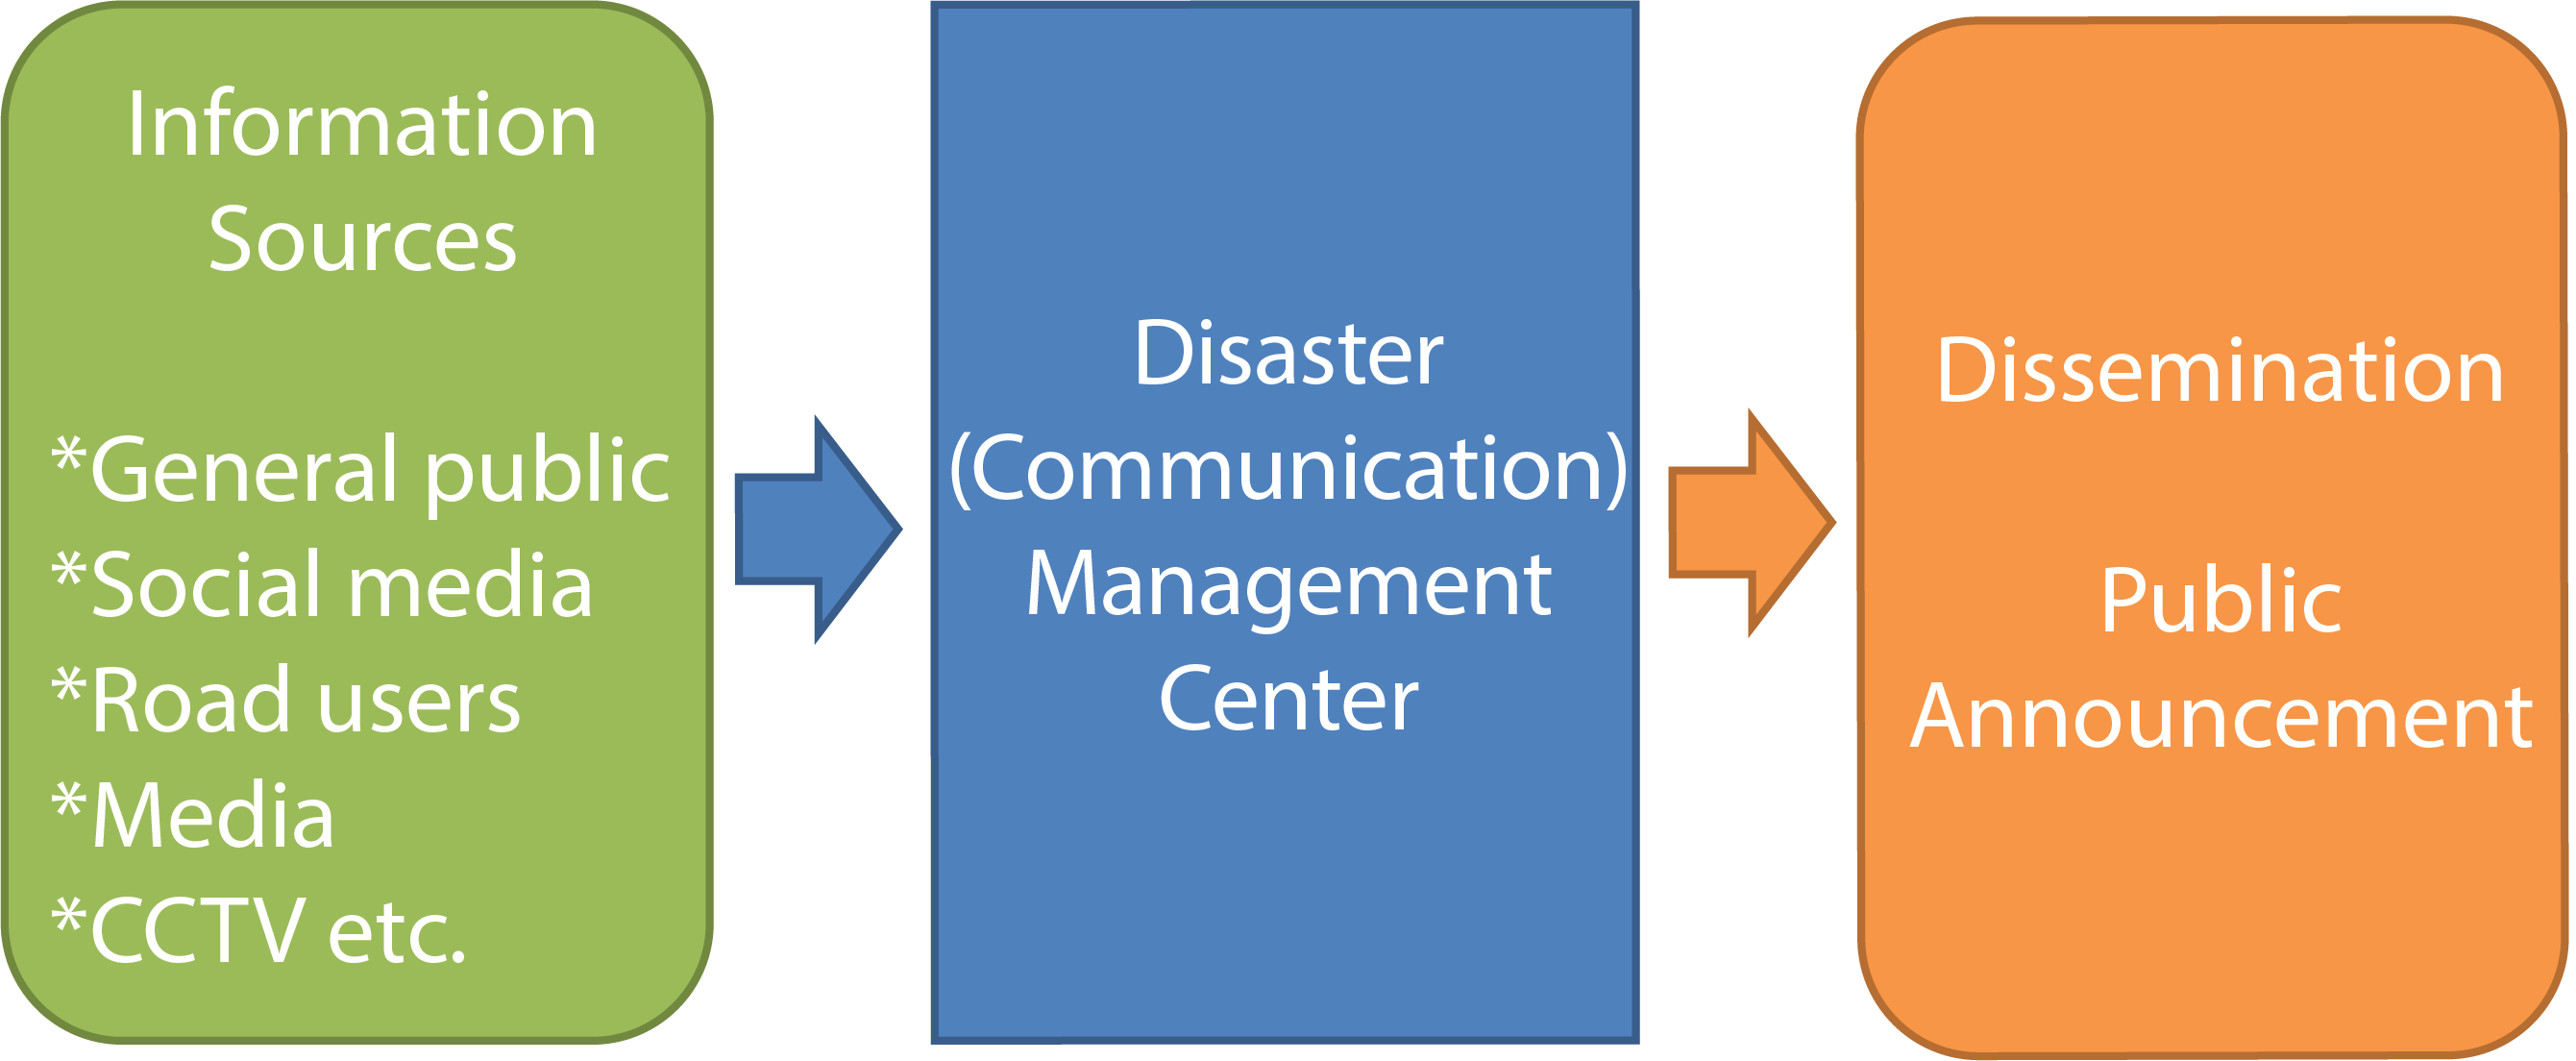 Figure 4.2.2.2 The general Structure of the communication flow in case of disaster in terms of public information